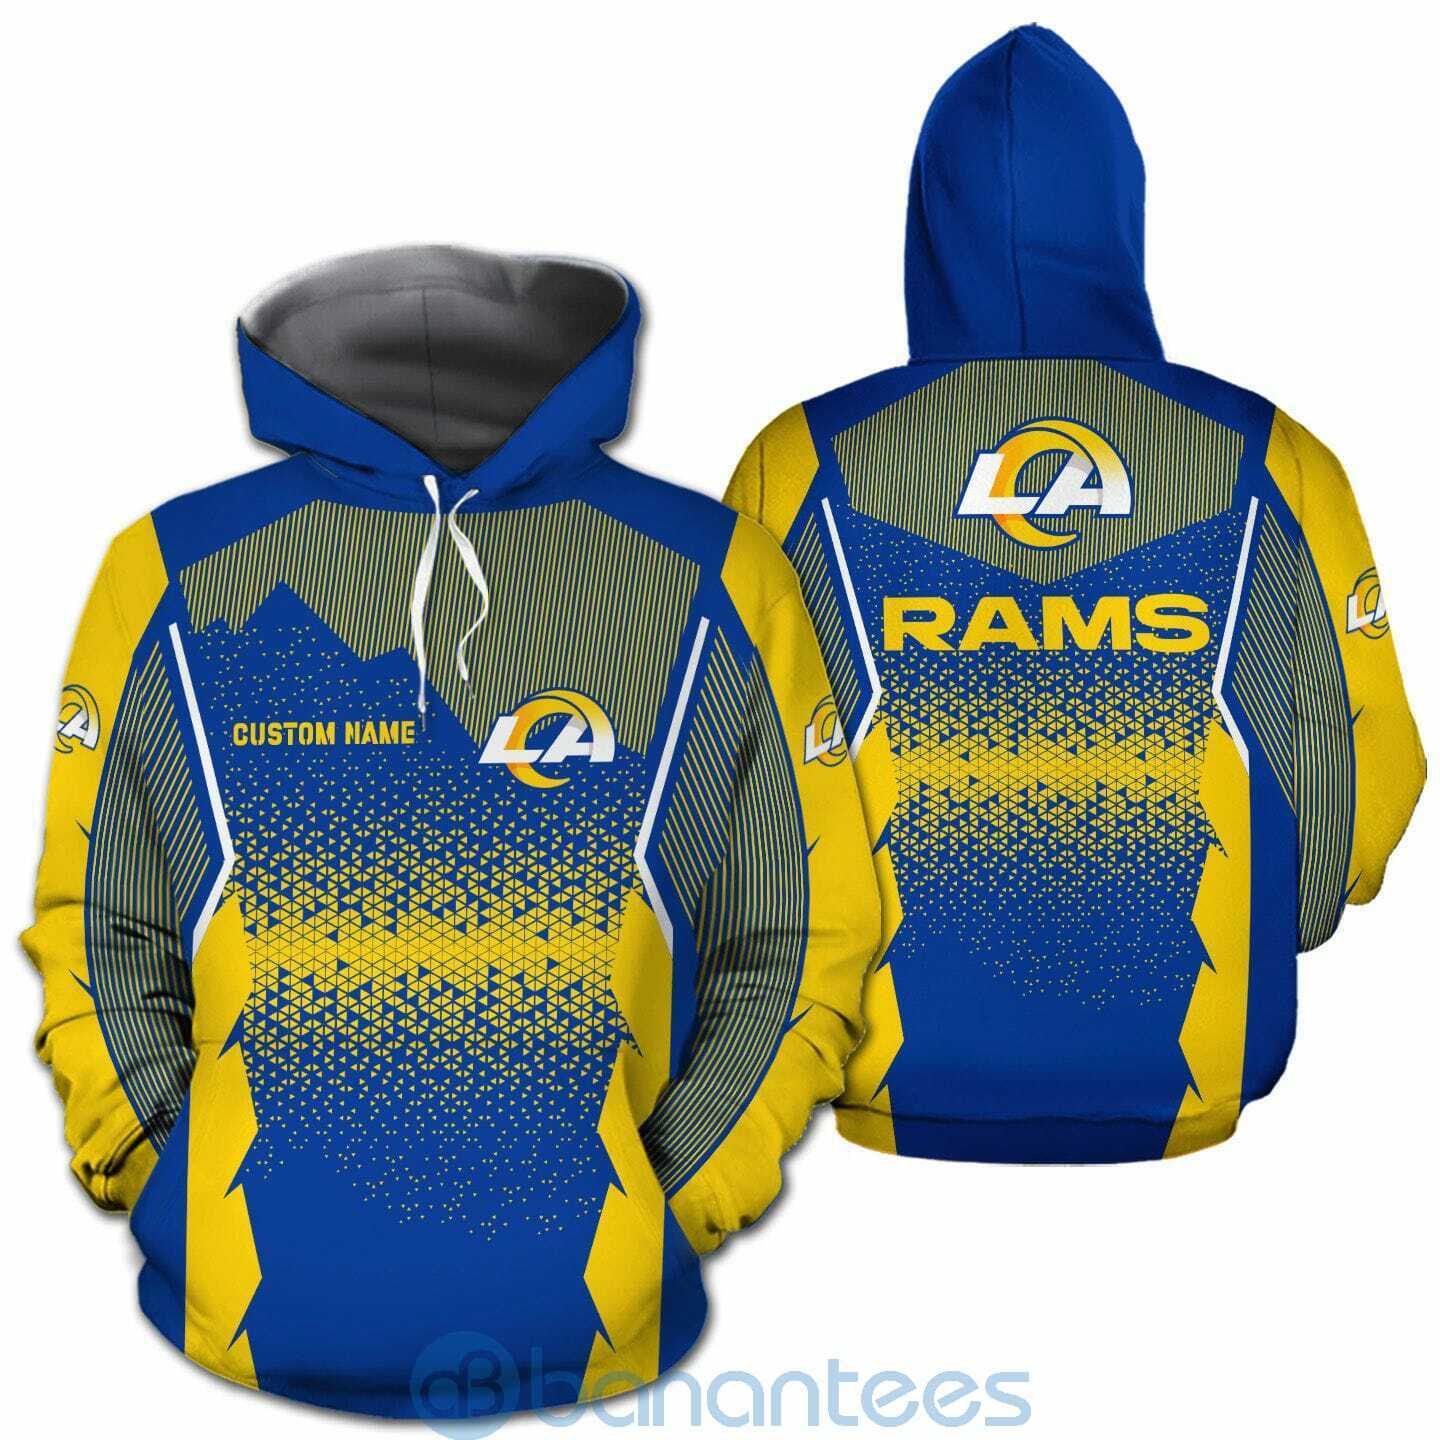 Los Angeles Rams NFL Football Team Custom Name 3D All Over Printed Shirt For Fans